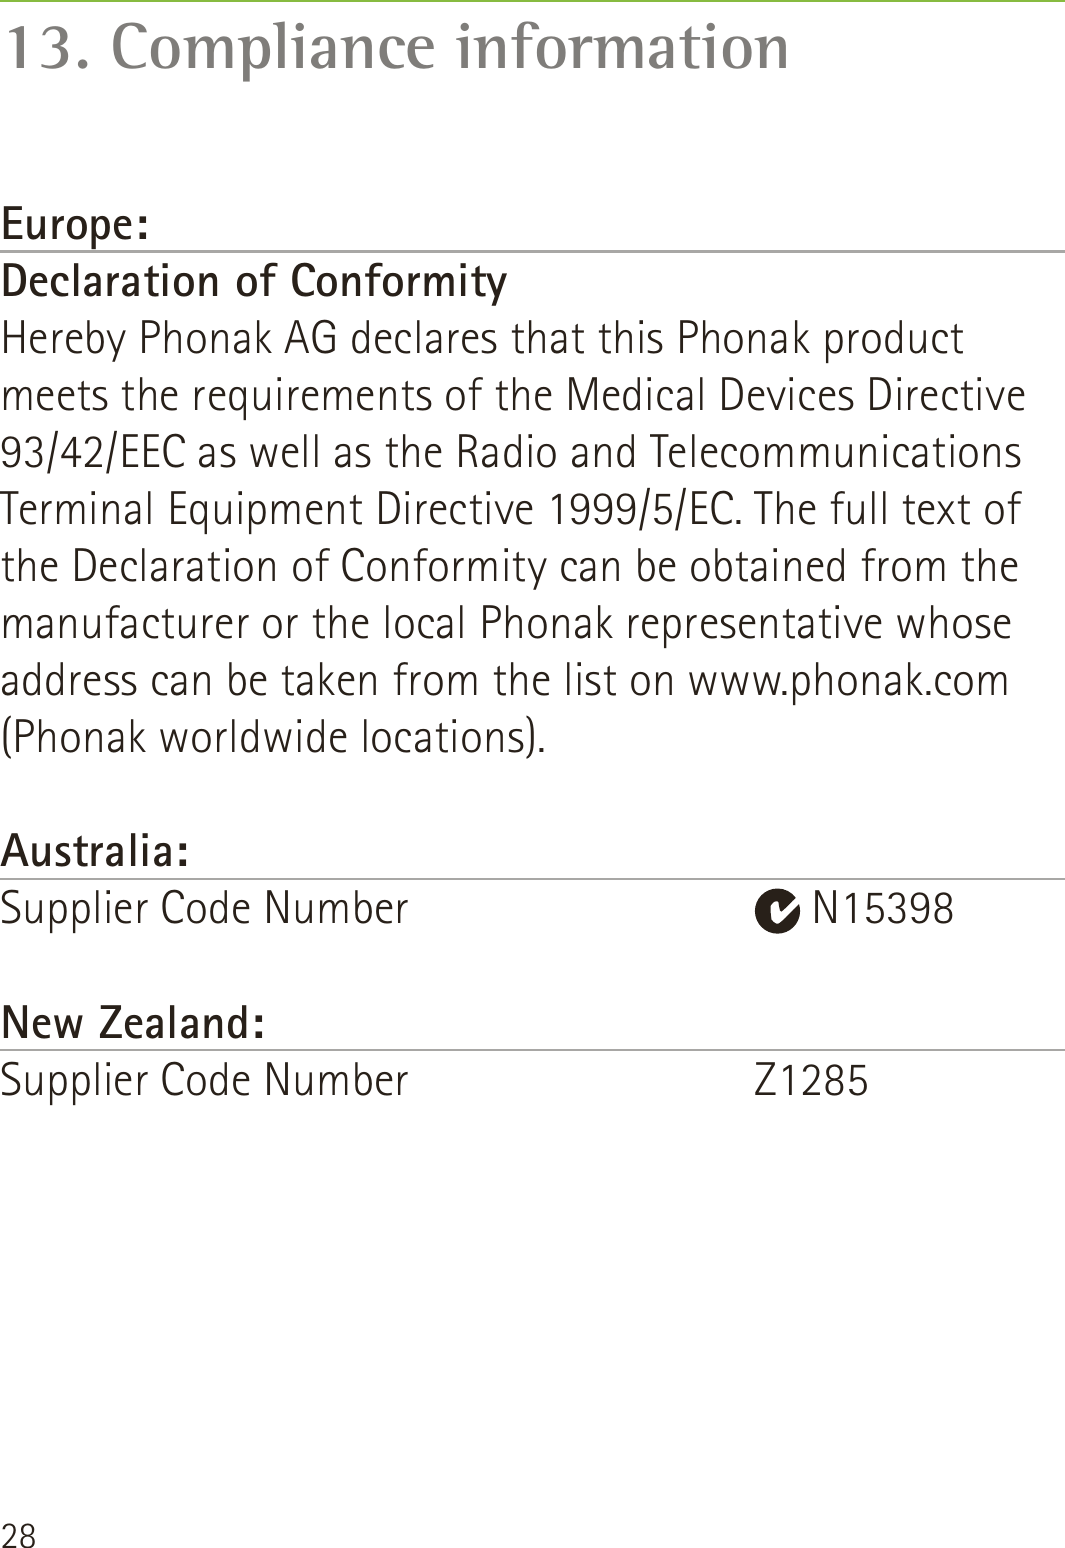 28Europe:Declaration of Conformity Hereby Phonak AG declares that this Phonak product meets the requirements of the Medical Devices Directive 93/42/EEC as well as the Radio and Telecommunications Terminal Equipment Directive 1999/5/EC. The full text of the Declaration of Conformity can be obtained from the manufacturer or the local Phonak representative whose address can be taken from the list on www.phonak.com (Phonak worldwide locations).Australia:Supplier Code Number     N15398New Zealand:Supplier Code Number    Z1285 13. Compliance information